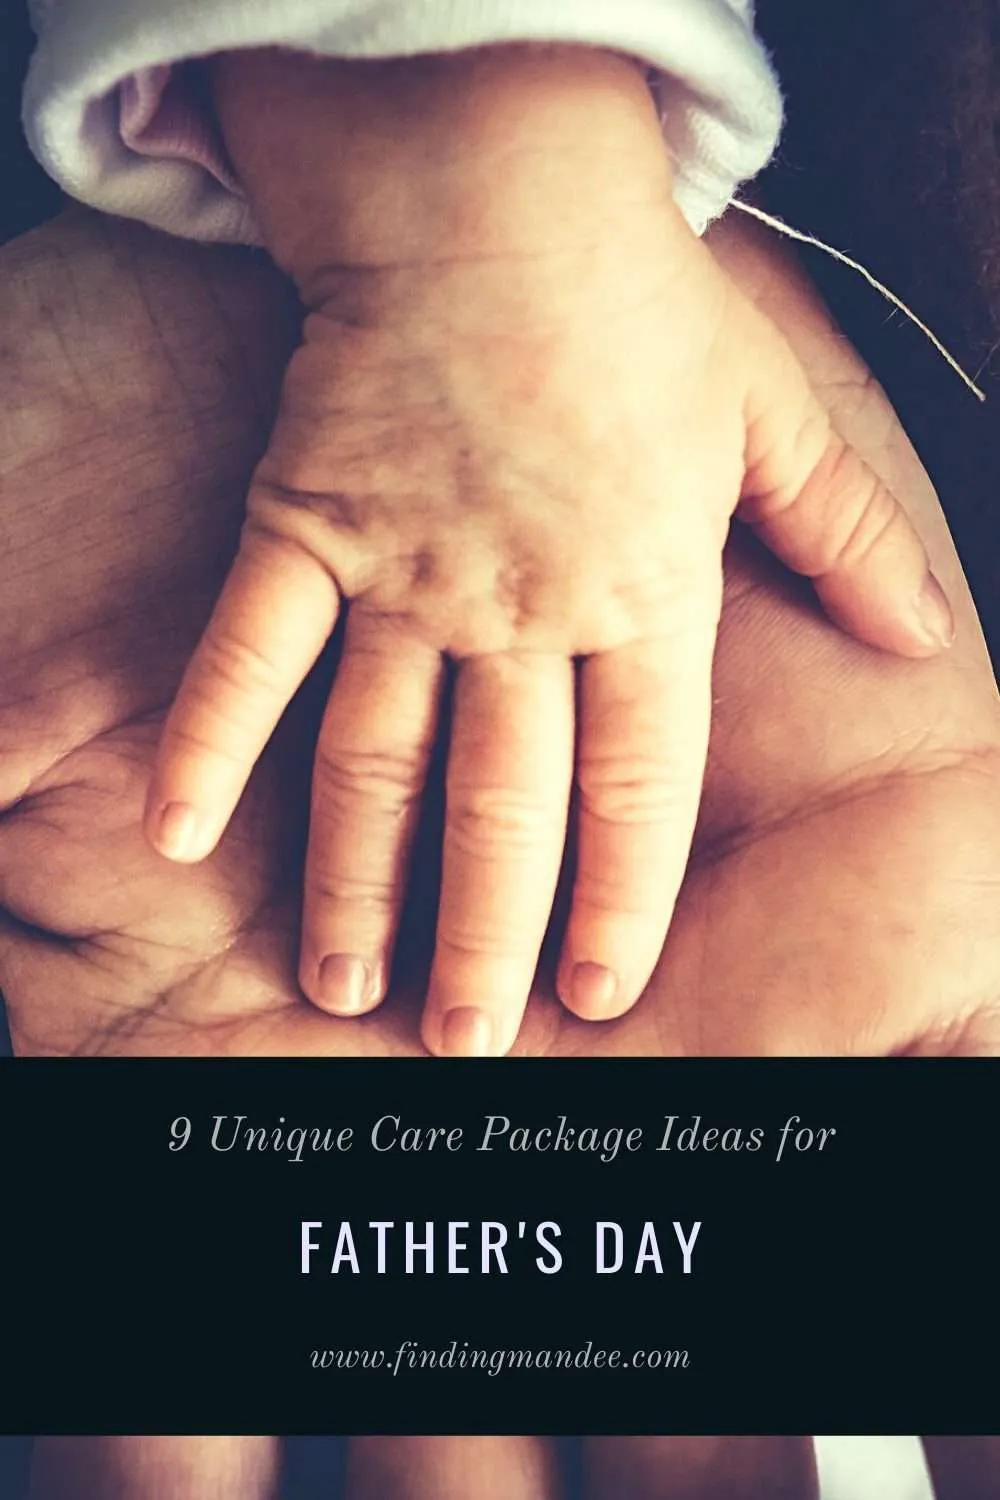 9 Unique Care Package Ideas for Father's Day | Finding Mandee